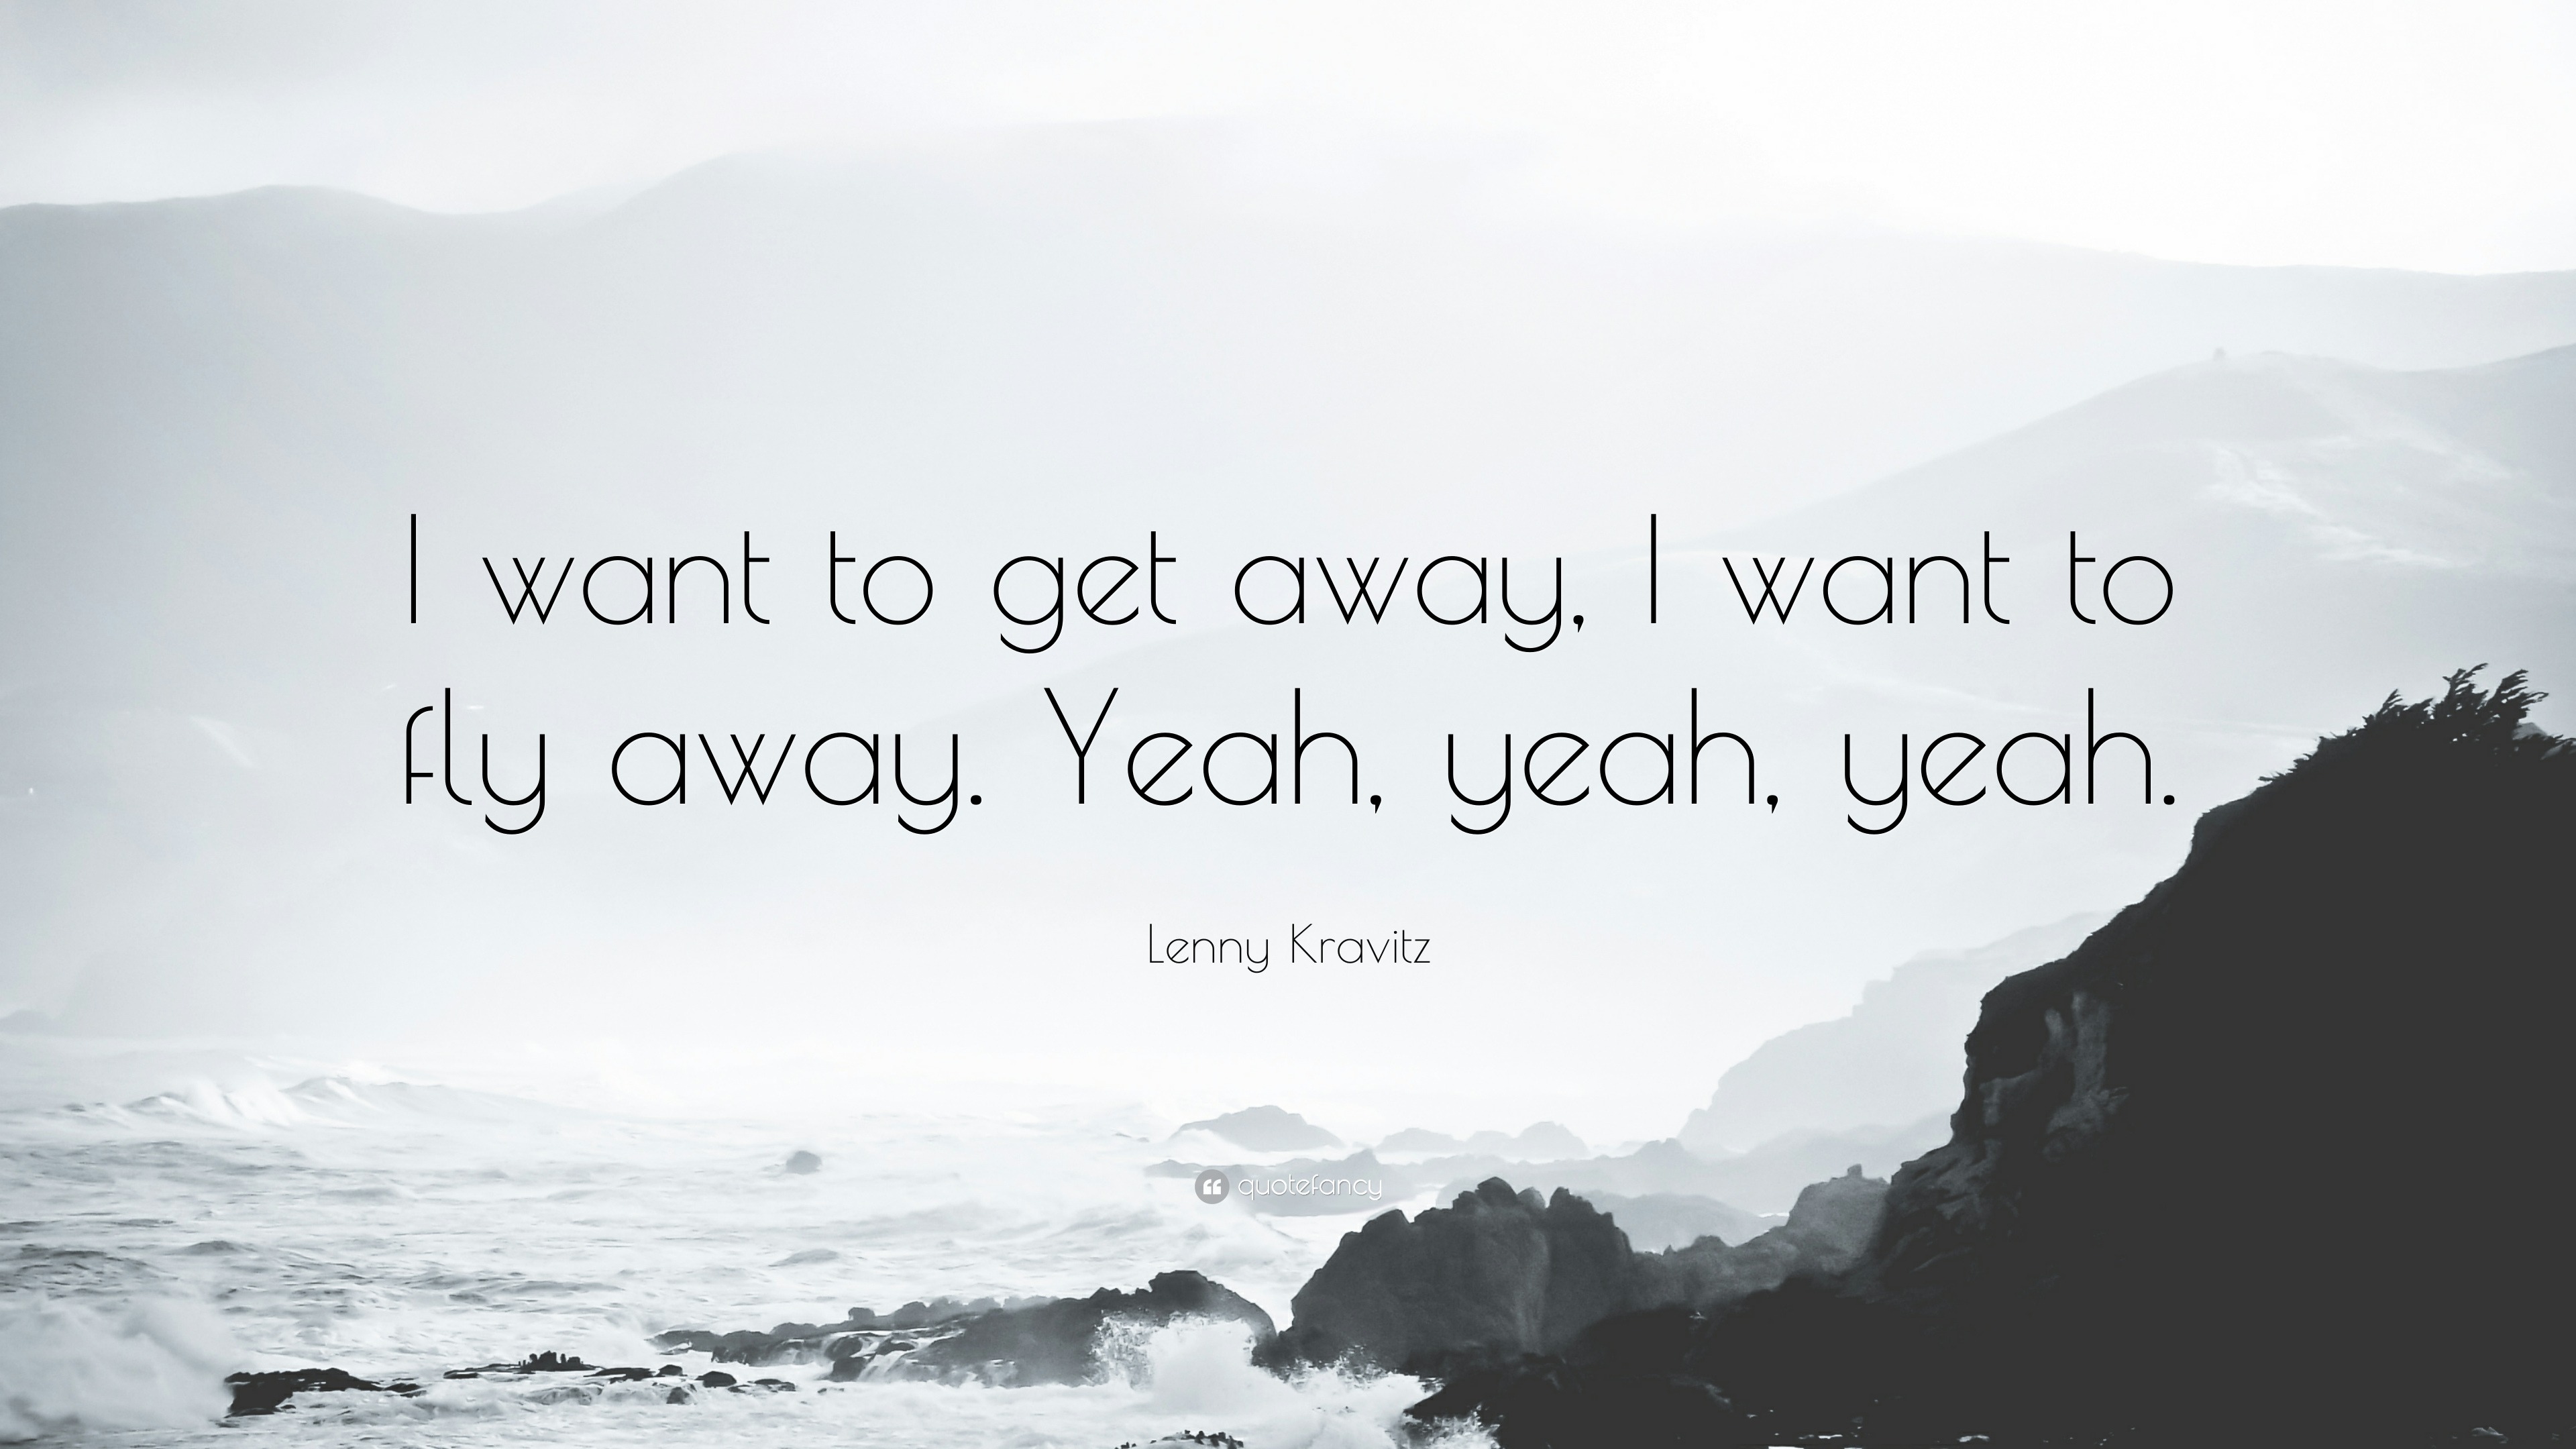 Lenny Kravitz Quote “I want to get away, I want to fly away. Yeah